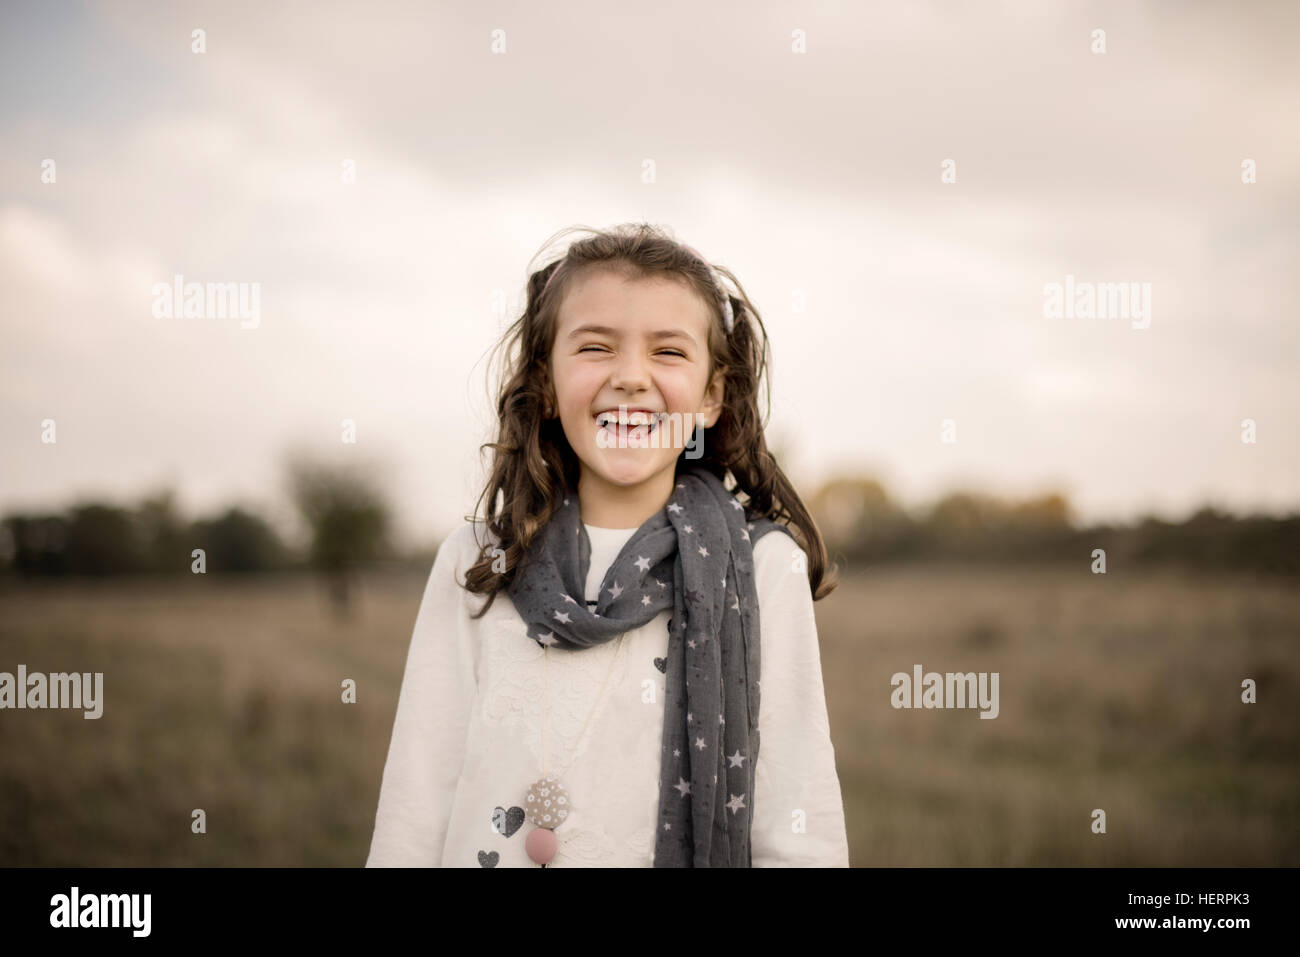 Portrait of a girl standing in a field laughing Stock Photo